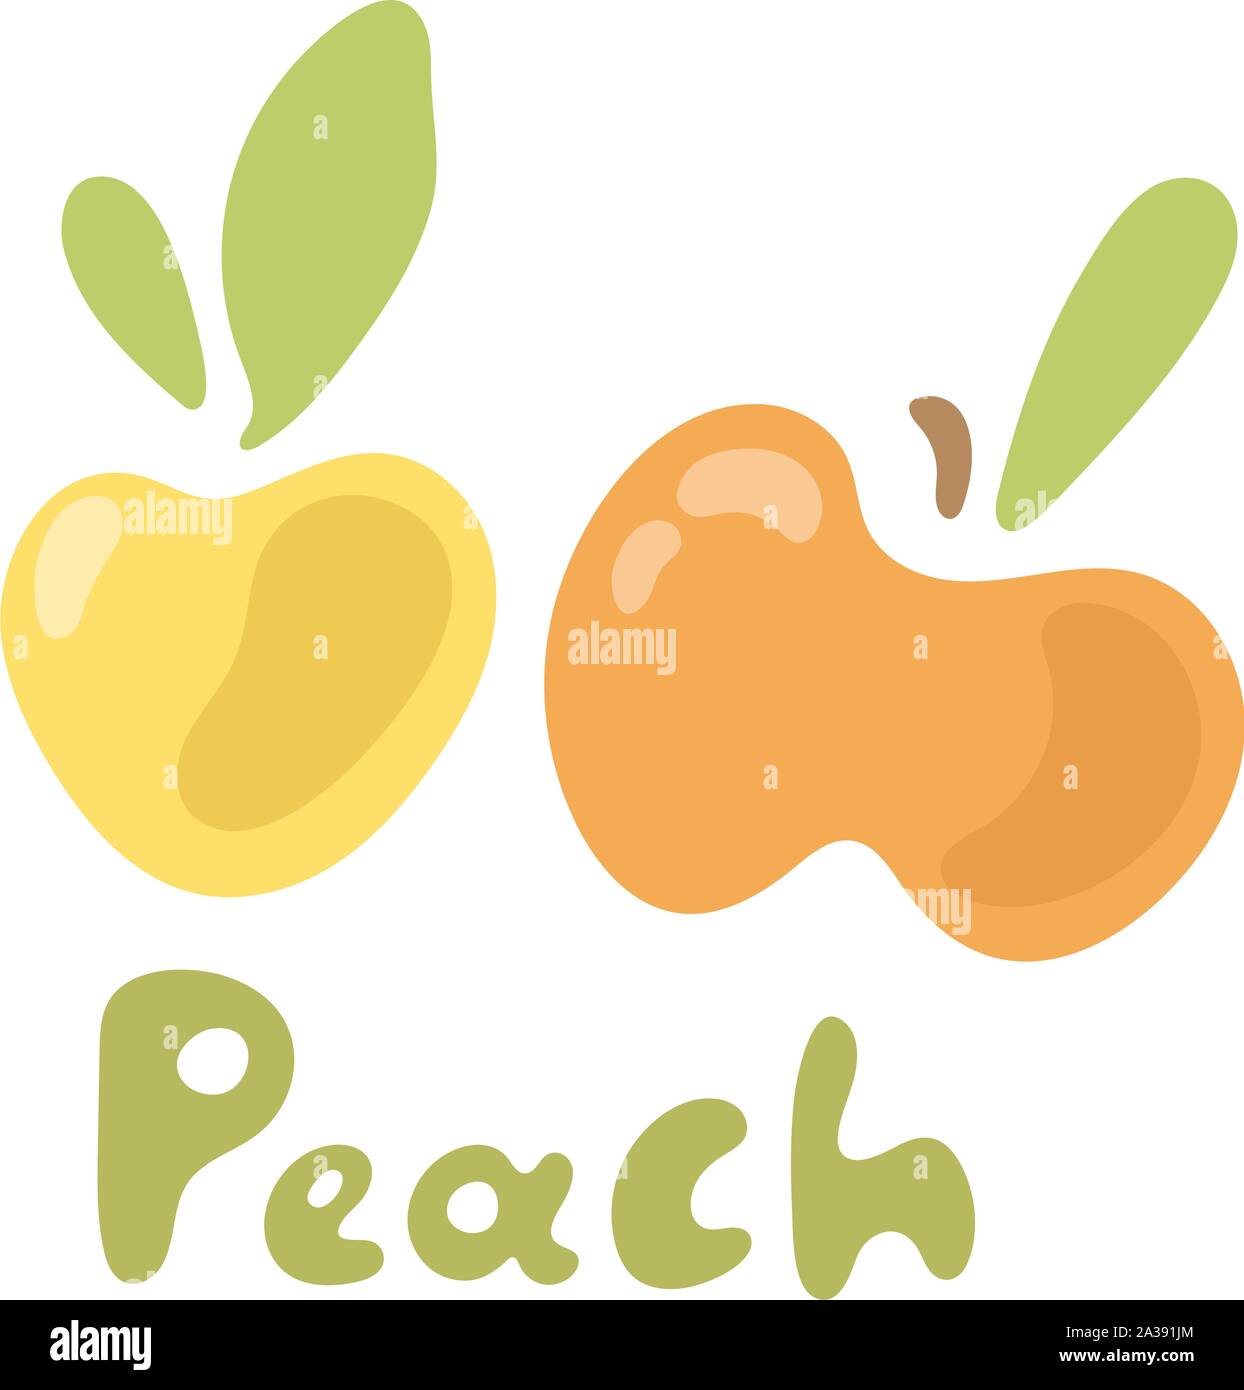 Peach and leaf vector icons. Cute and simple design with doodle childish text Stock Vector